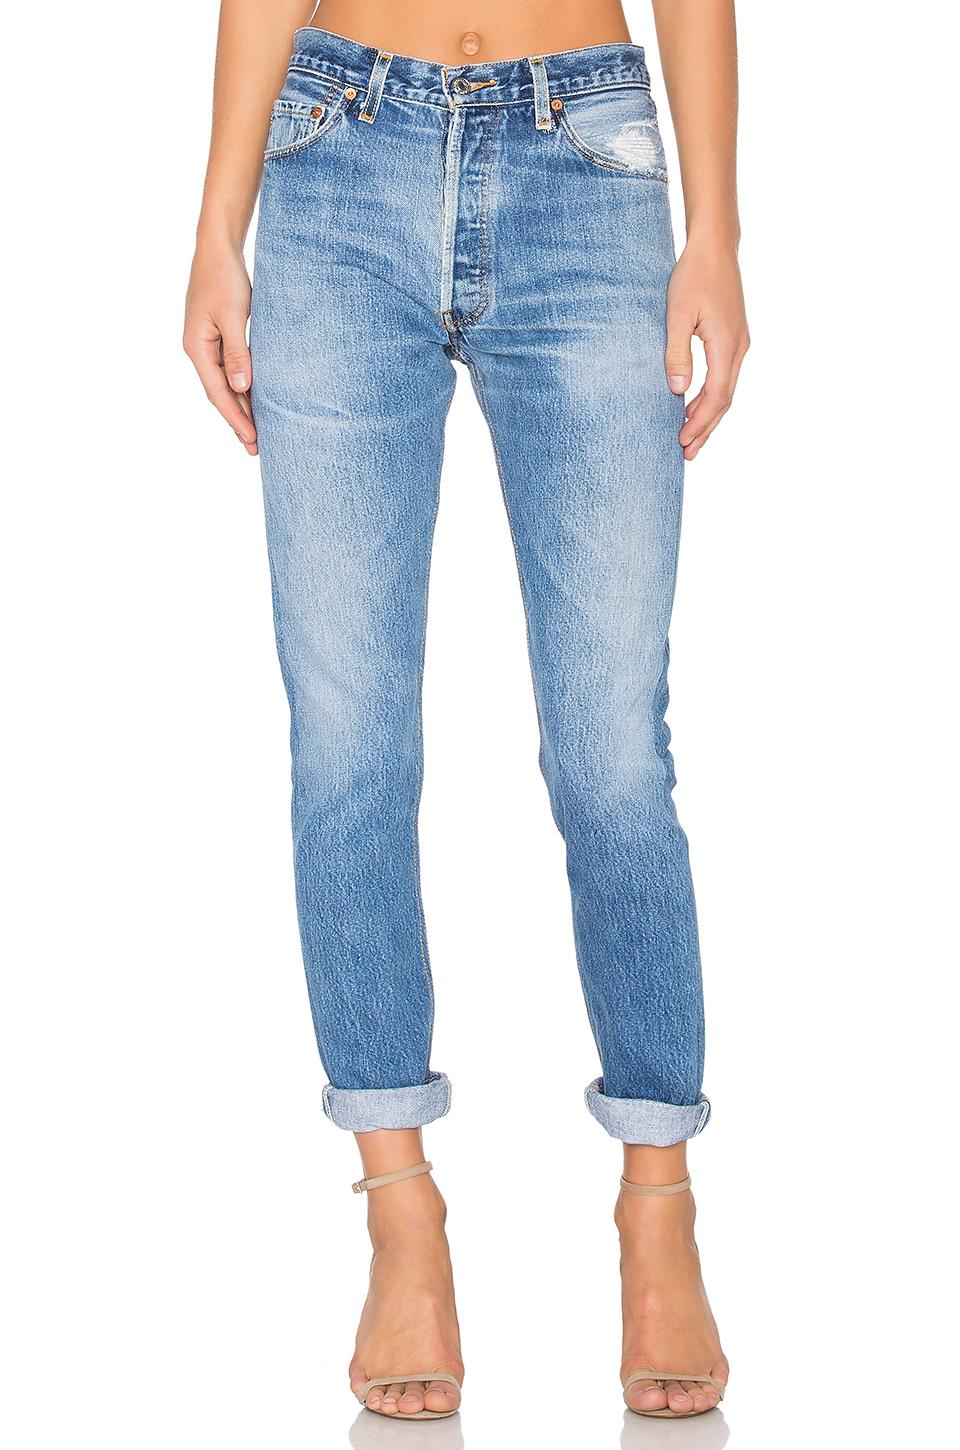 Lyst - Re/Done High Rise Jeans in Blue